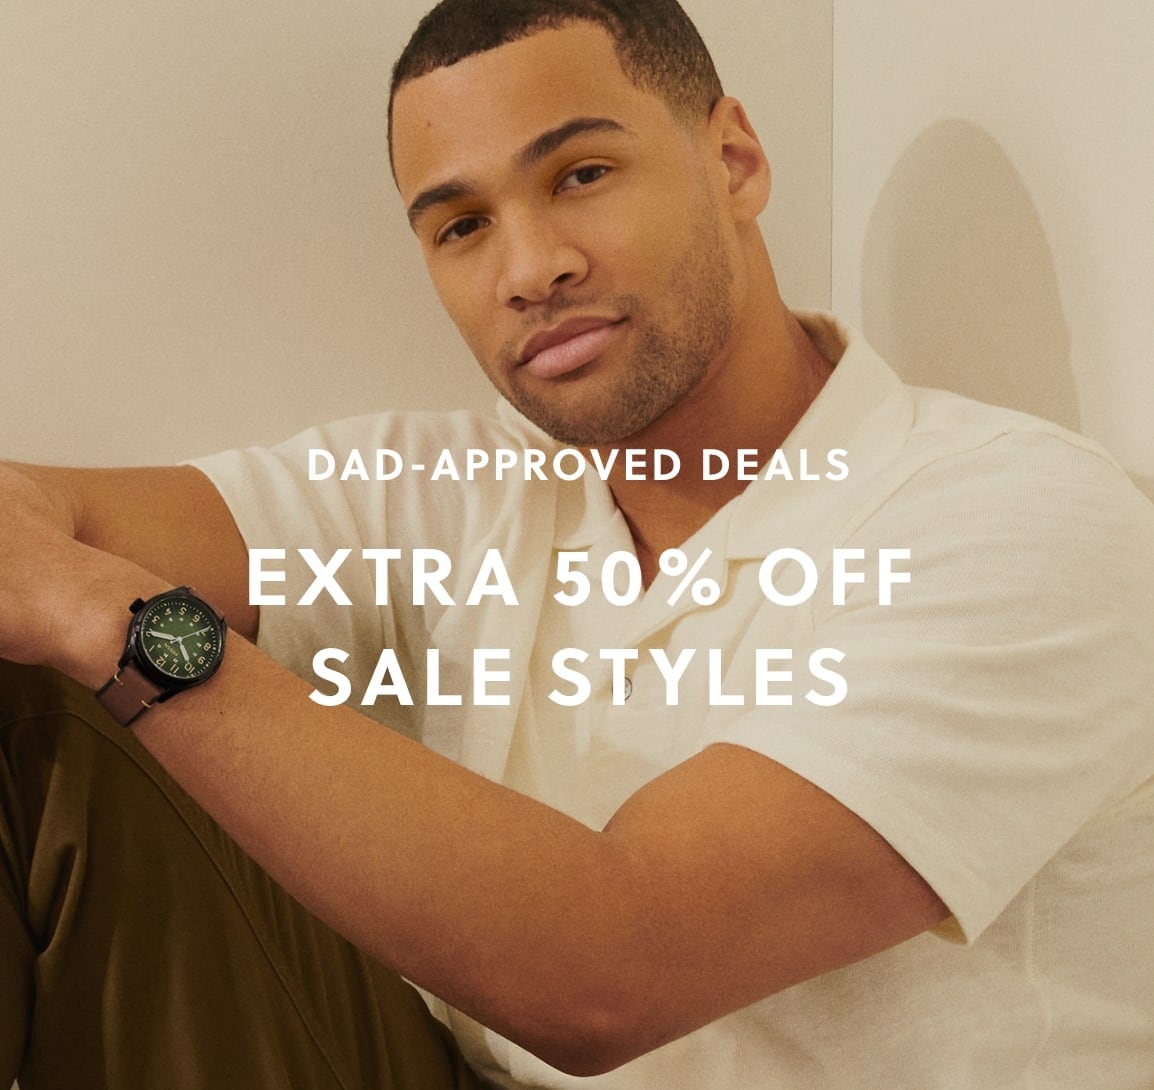 DAD-APPROVED DEALS EXTRA 50% OFF SALE STYLES